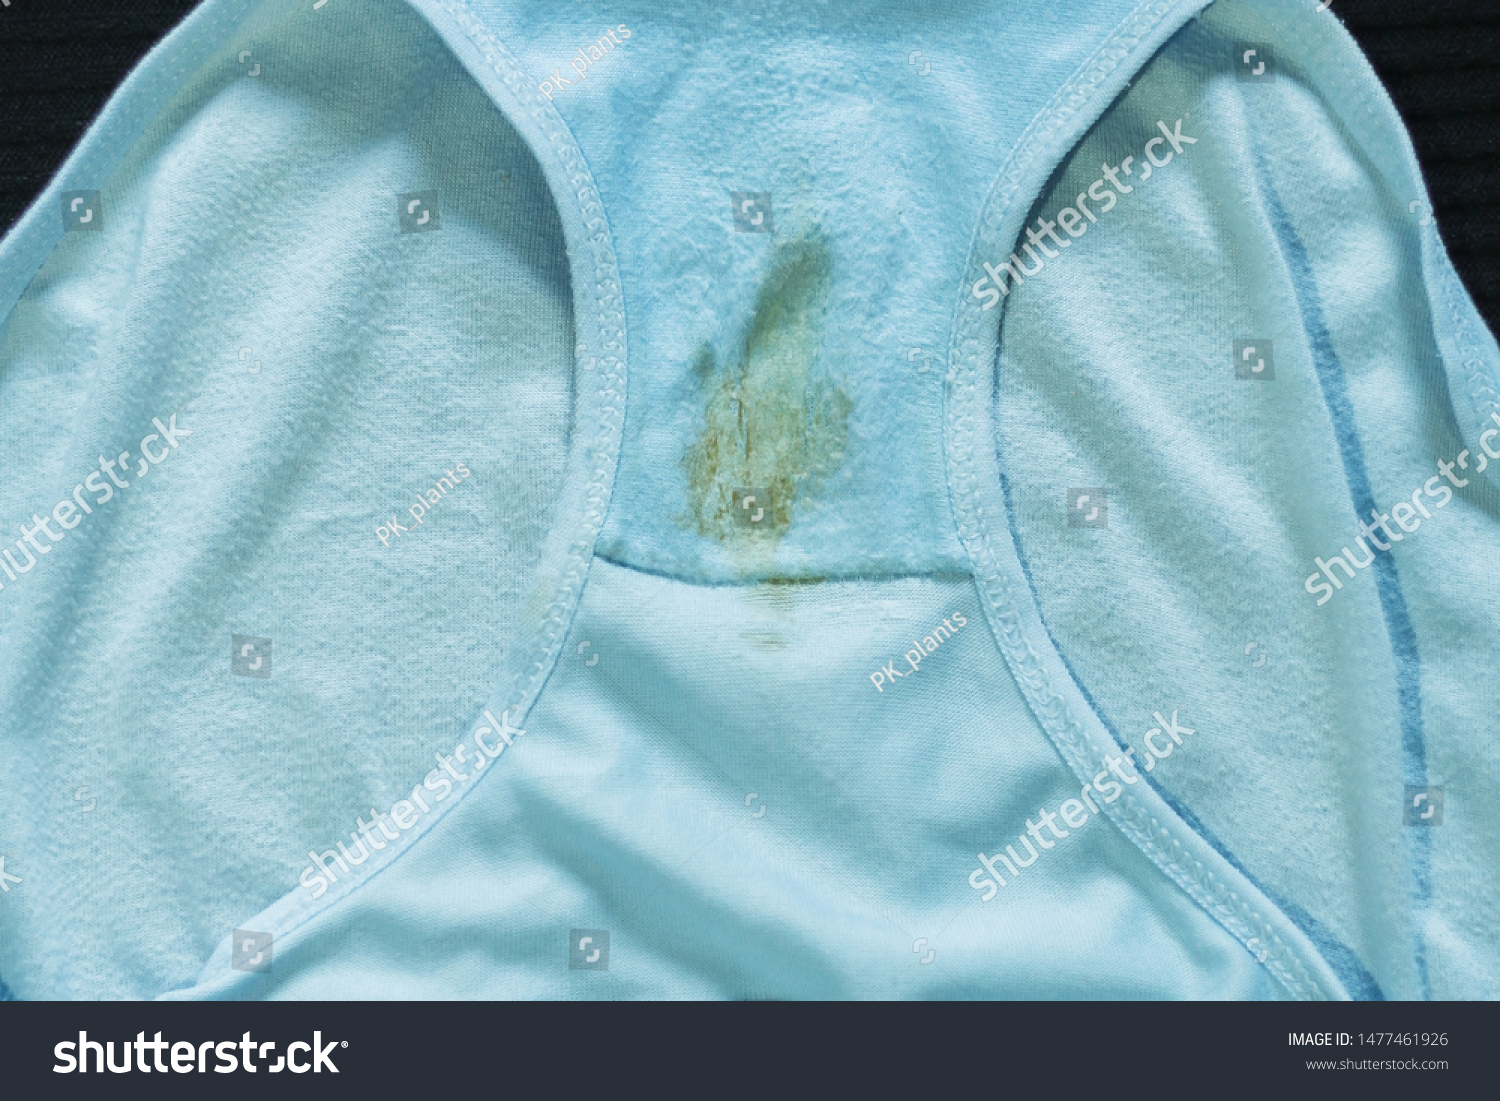 Stains on panties